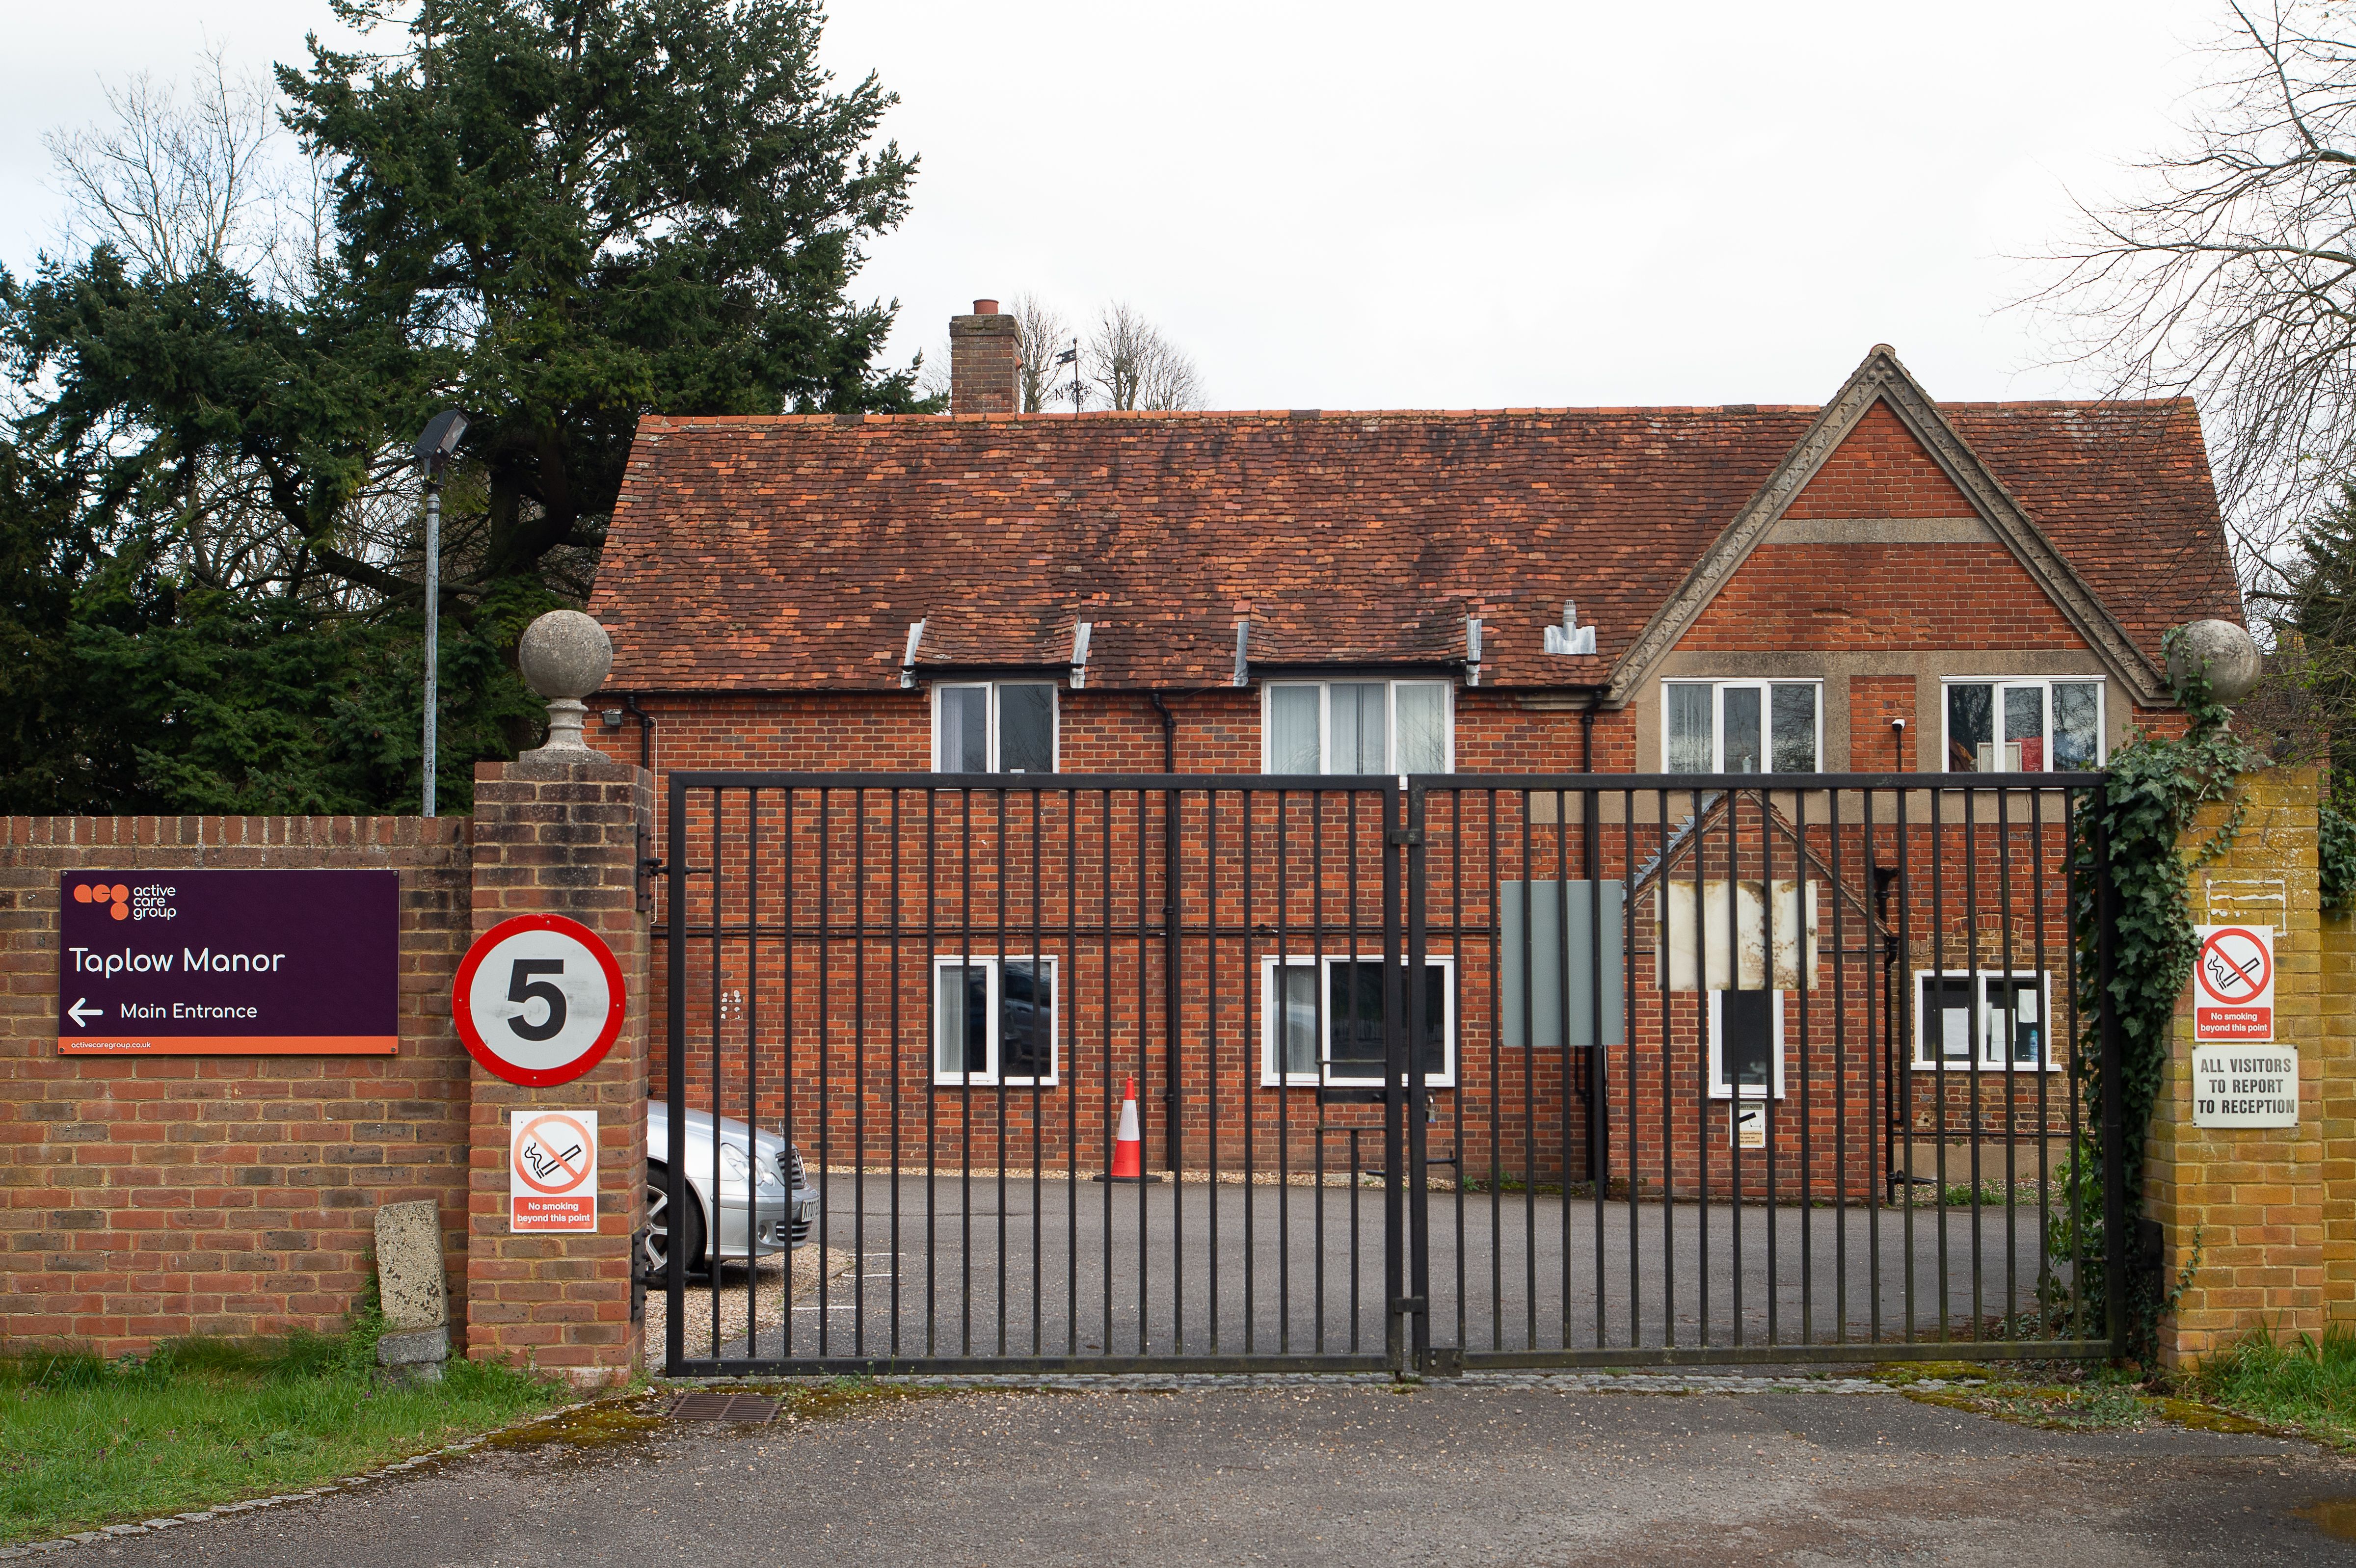 Patients of Taplow Manor in Maidenhead spoke out about maltreatment